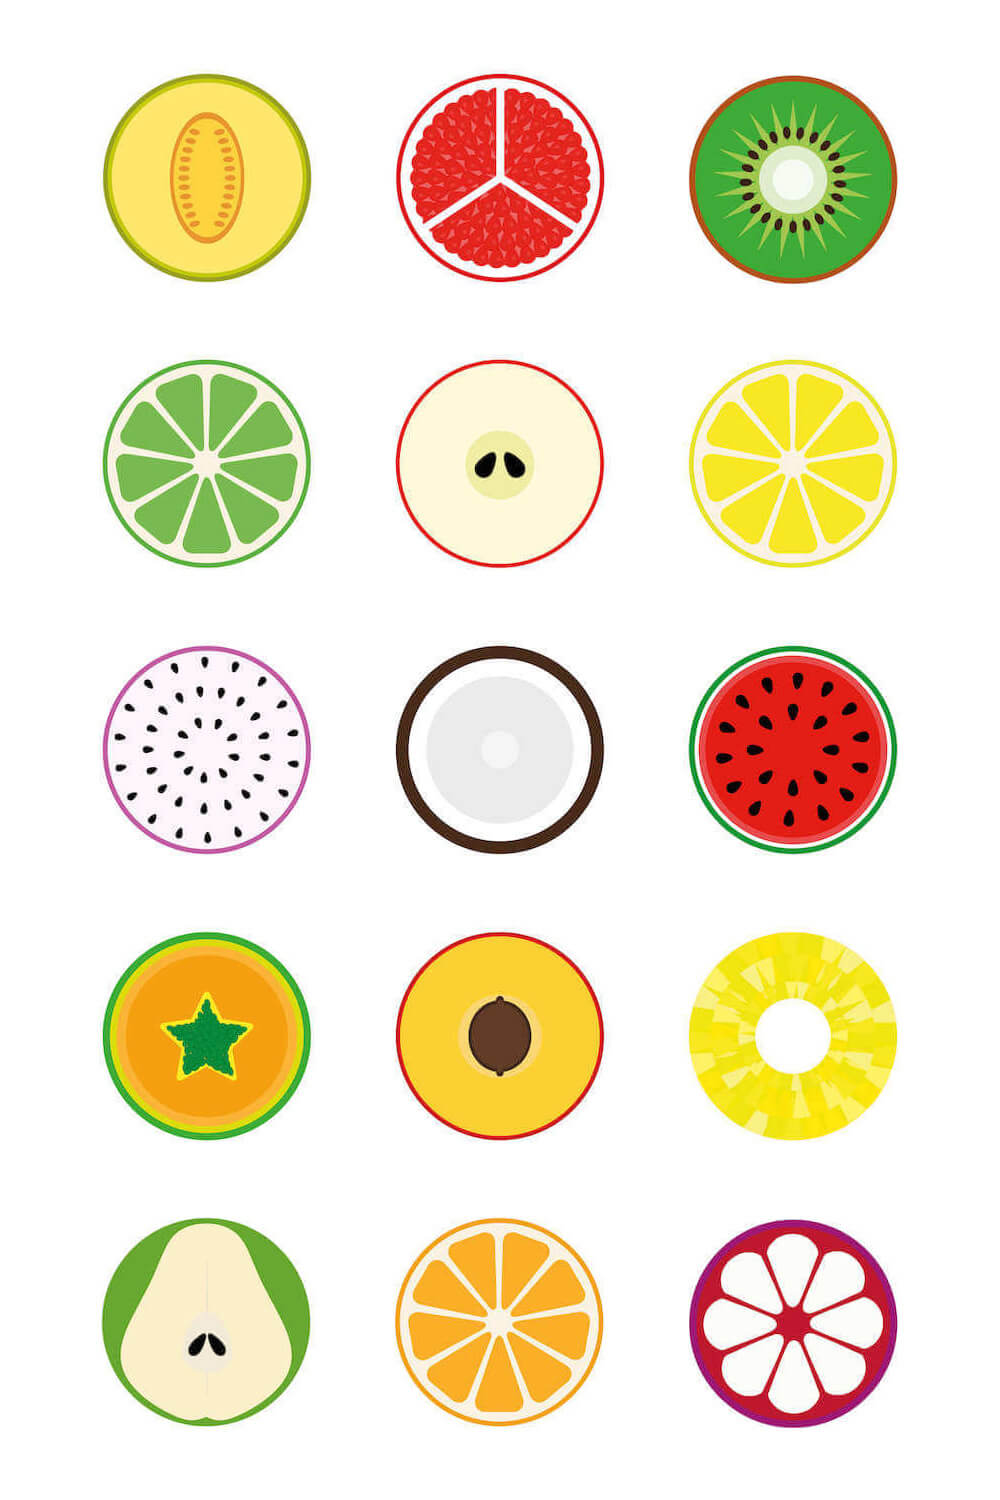 collection of vector fruit icons pinterest image.